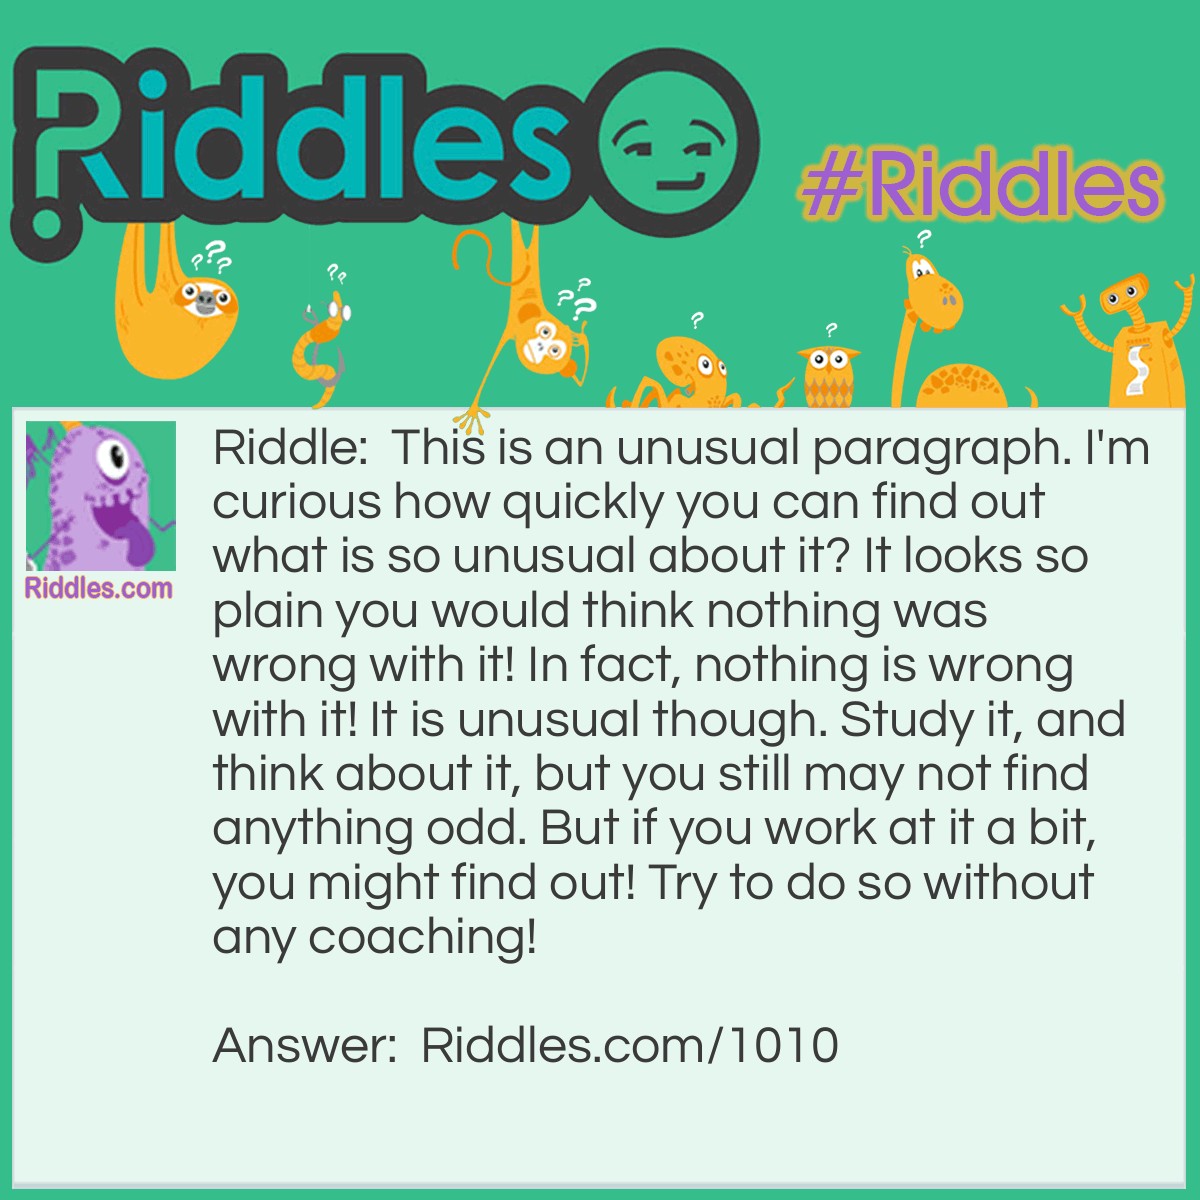 Riddle: This is an unusual paragraph. I'm curious how quickly you can find out what is so unusual about it? It looks so plain you would think nothing was wrong with it! In fact, nothing is wrong with it! It is unusual though. Study it, and think about it, but you still may not find anything odd. But if you work at it a bit, you might find out! Try to do so without any coaching!   Answer: The entire paragraph has no ' e '